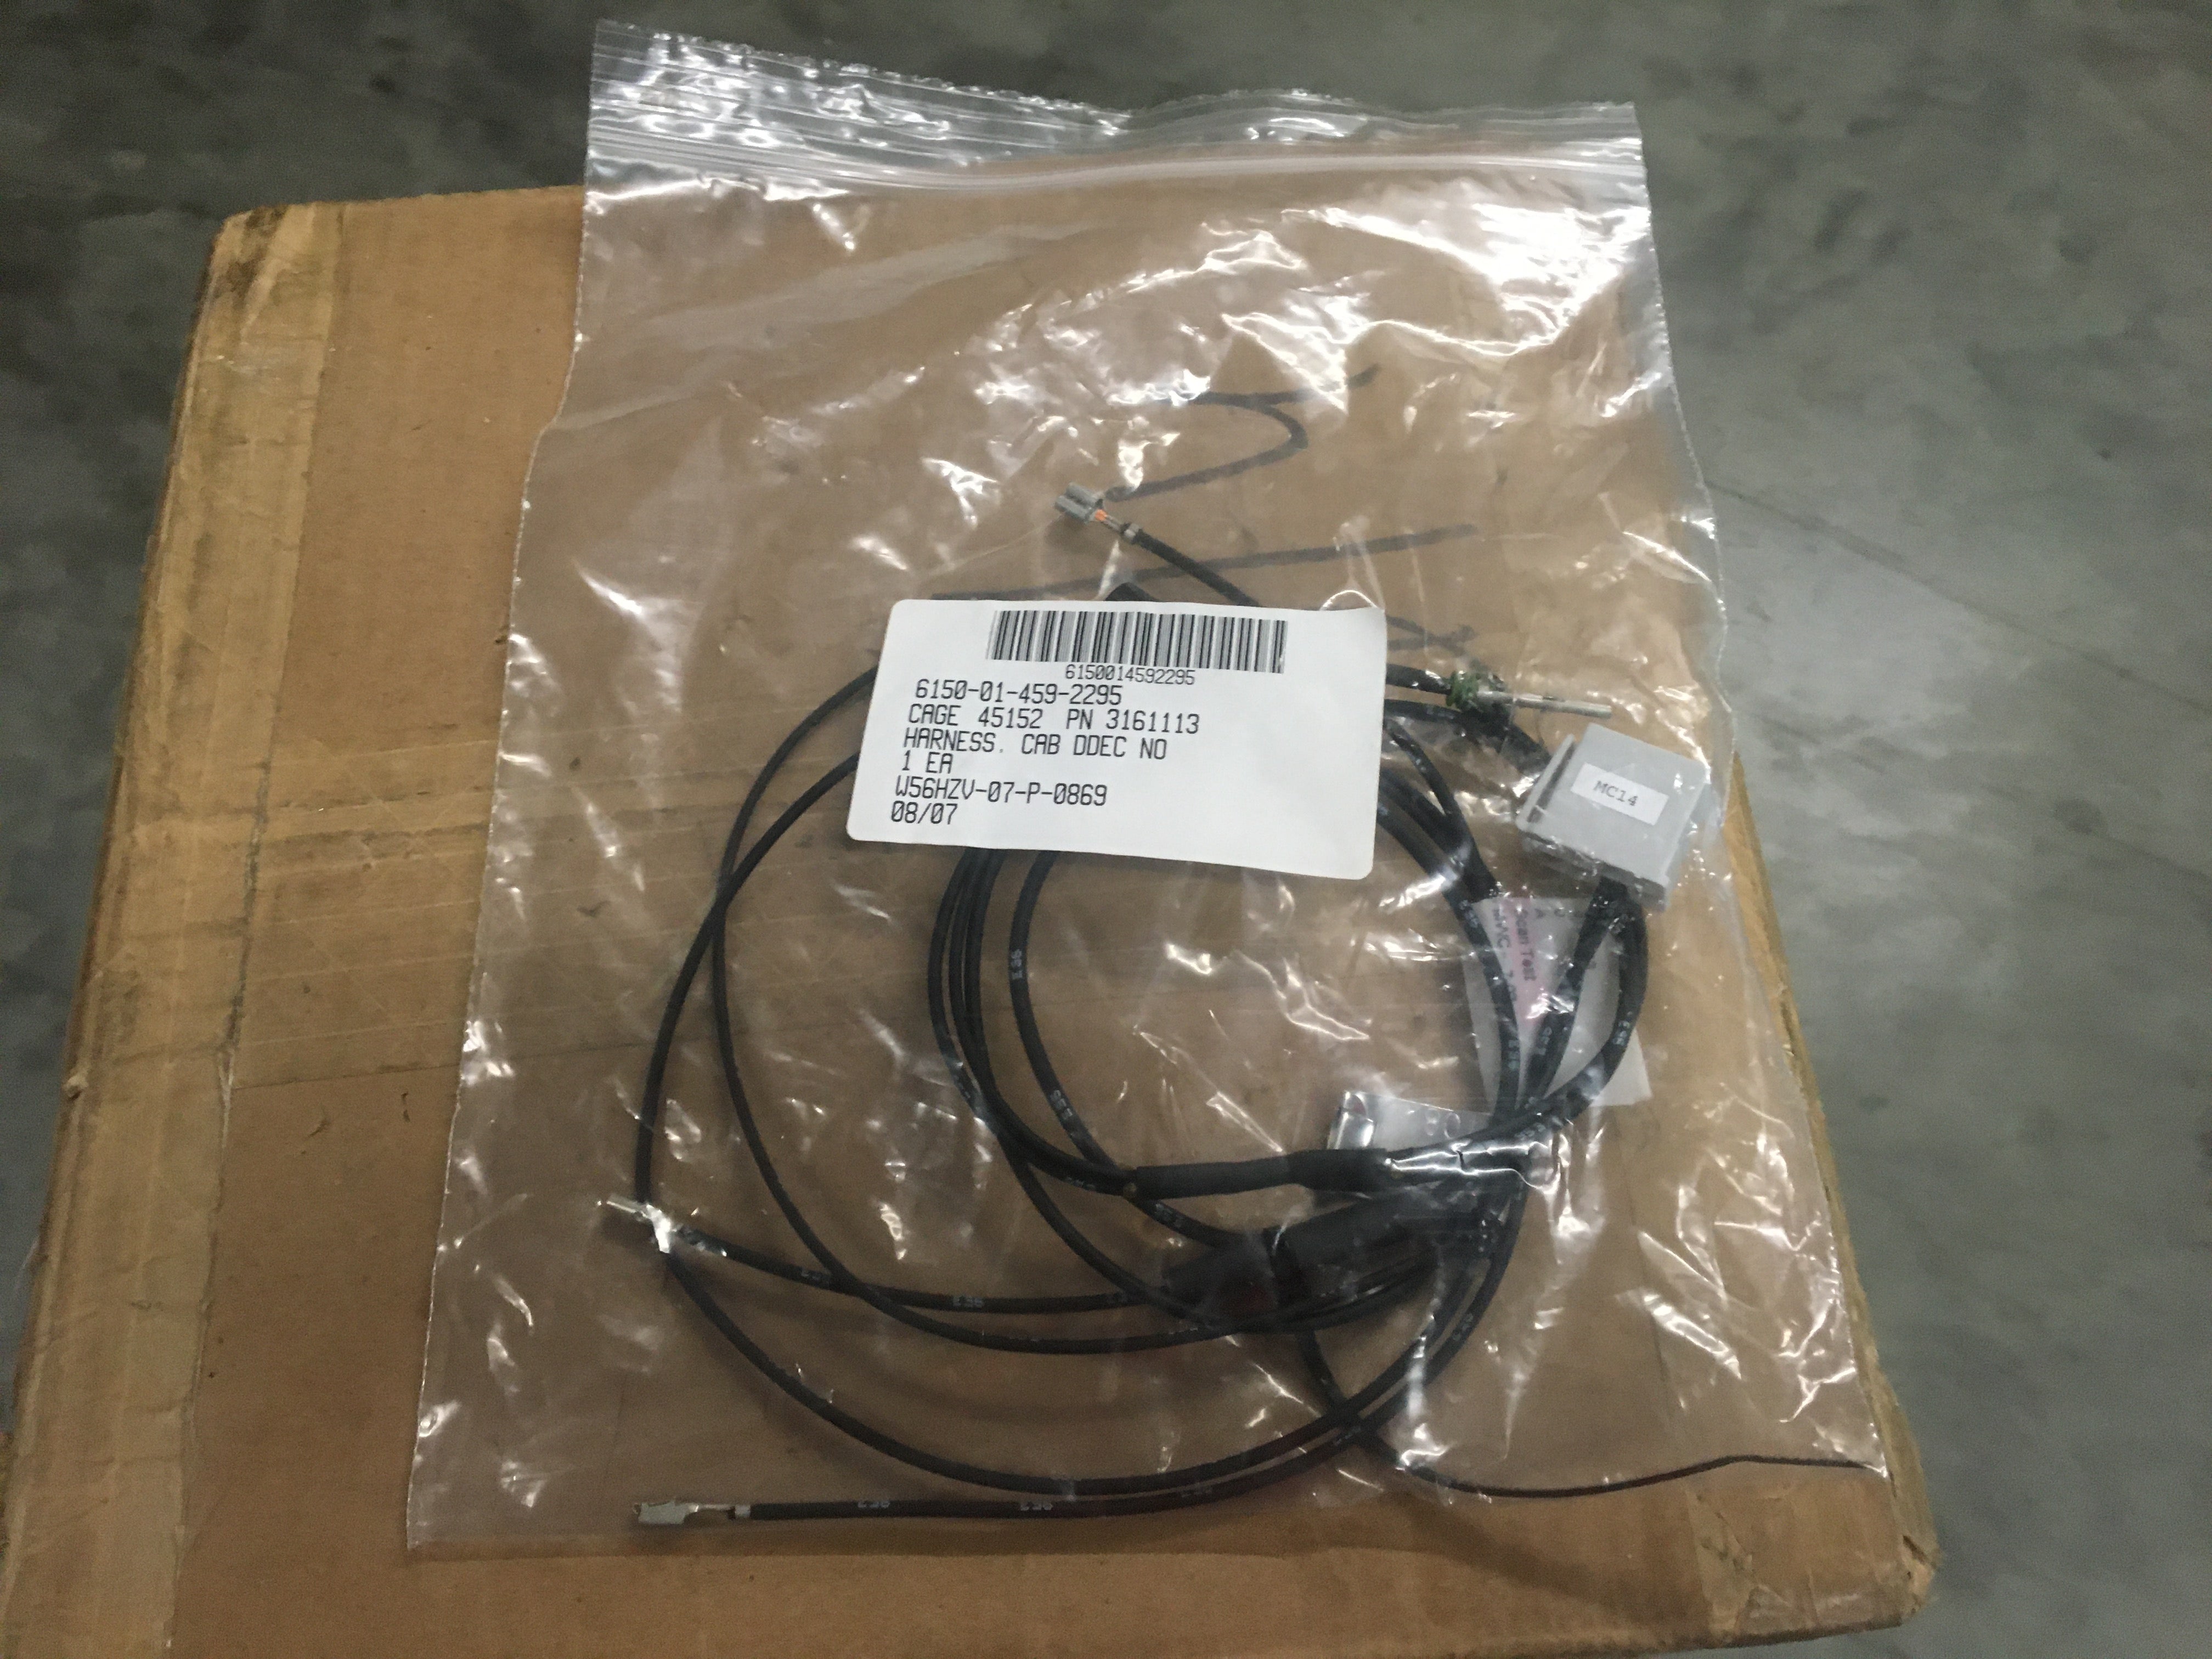 Oshkosh Branched Wiring Harness for M1074, M1075, M1076, M1077 NSN:6150-01-459-2295 Model:3161113